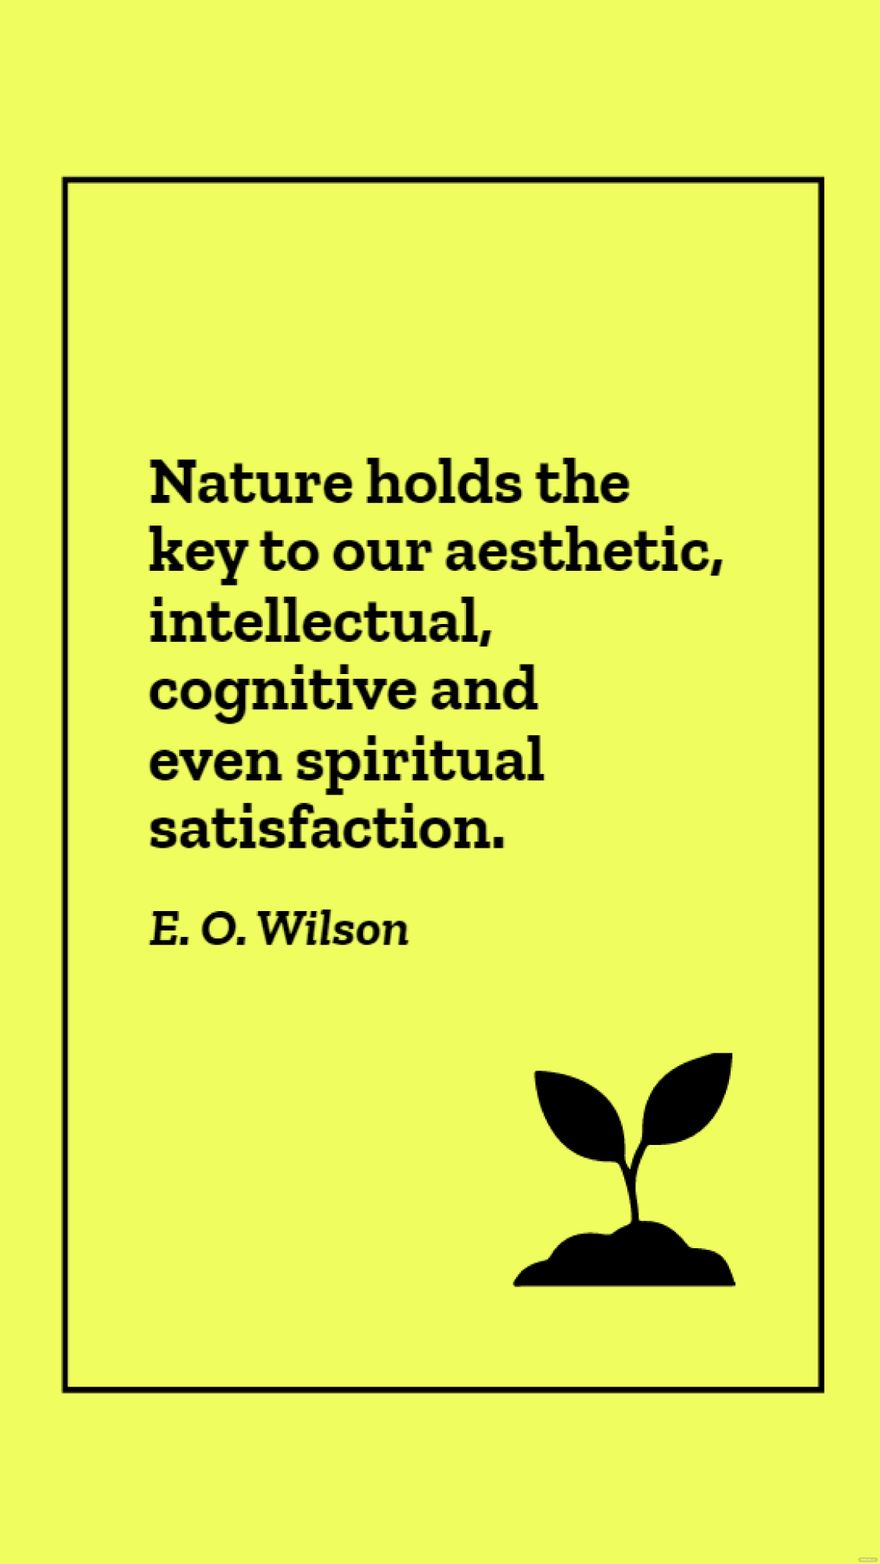 E. O. Wilson - Nature holds the key to our aesthetic, intellectual, cognitive and even spiritual satisfaction.